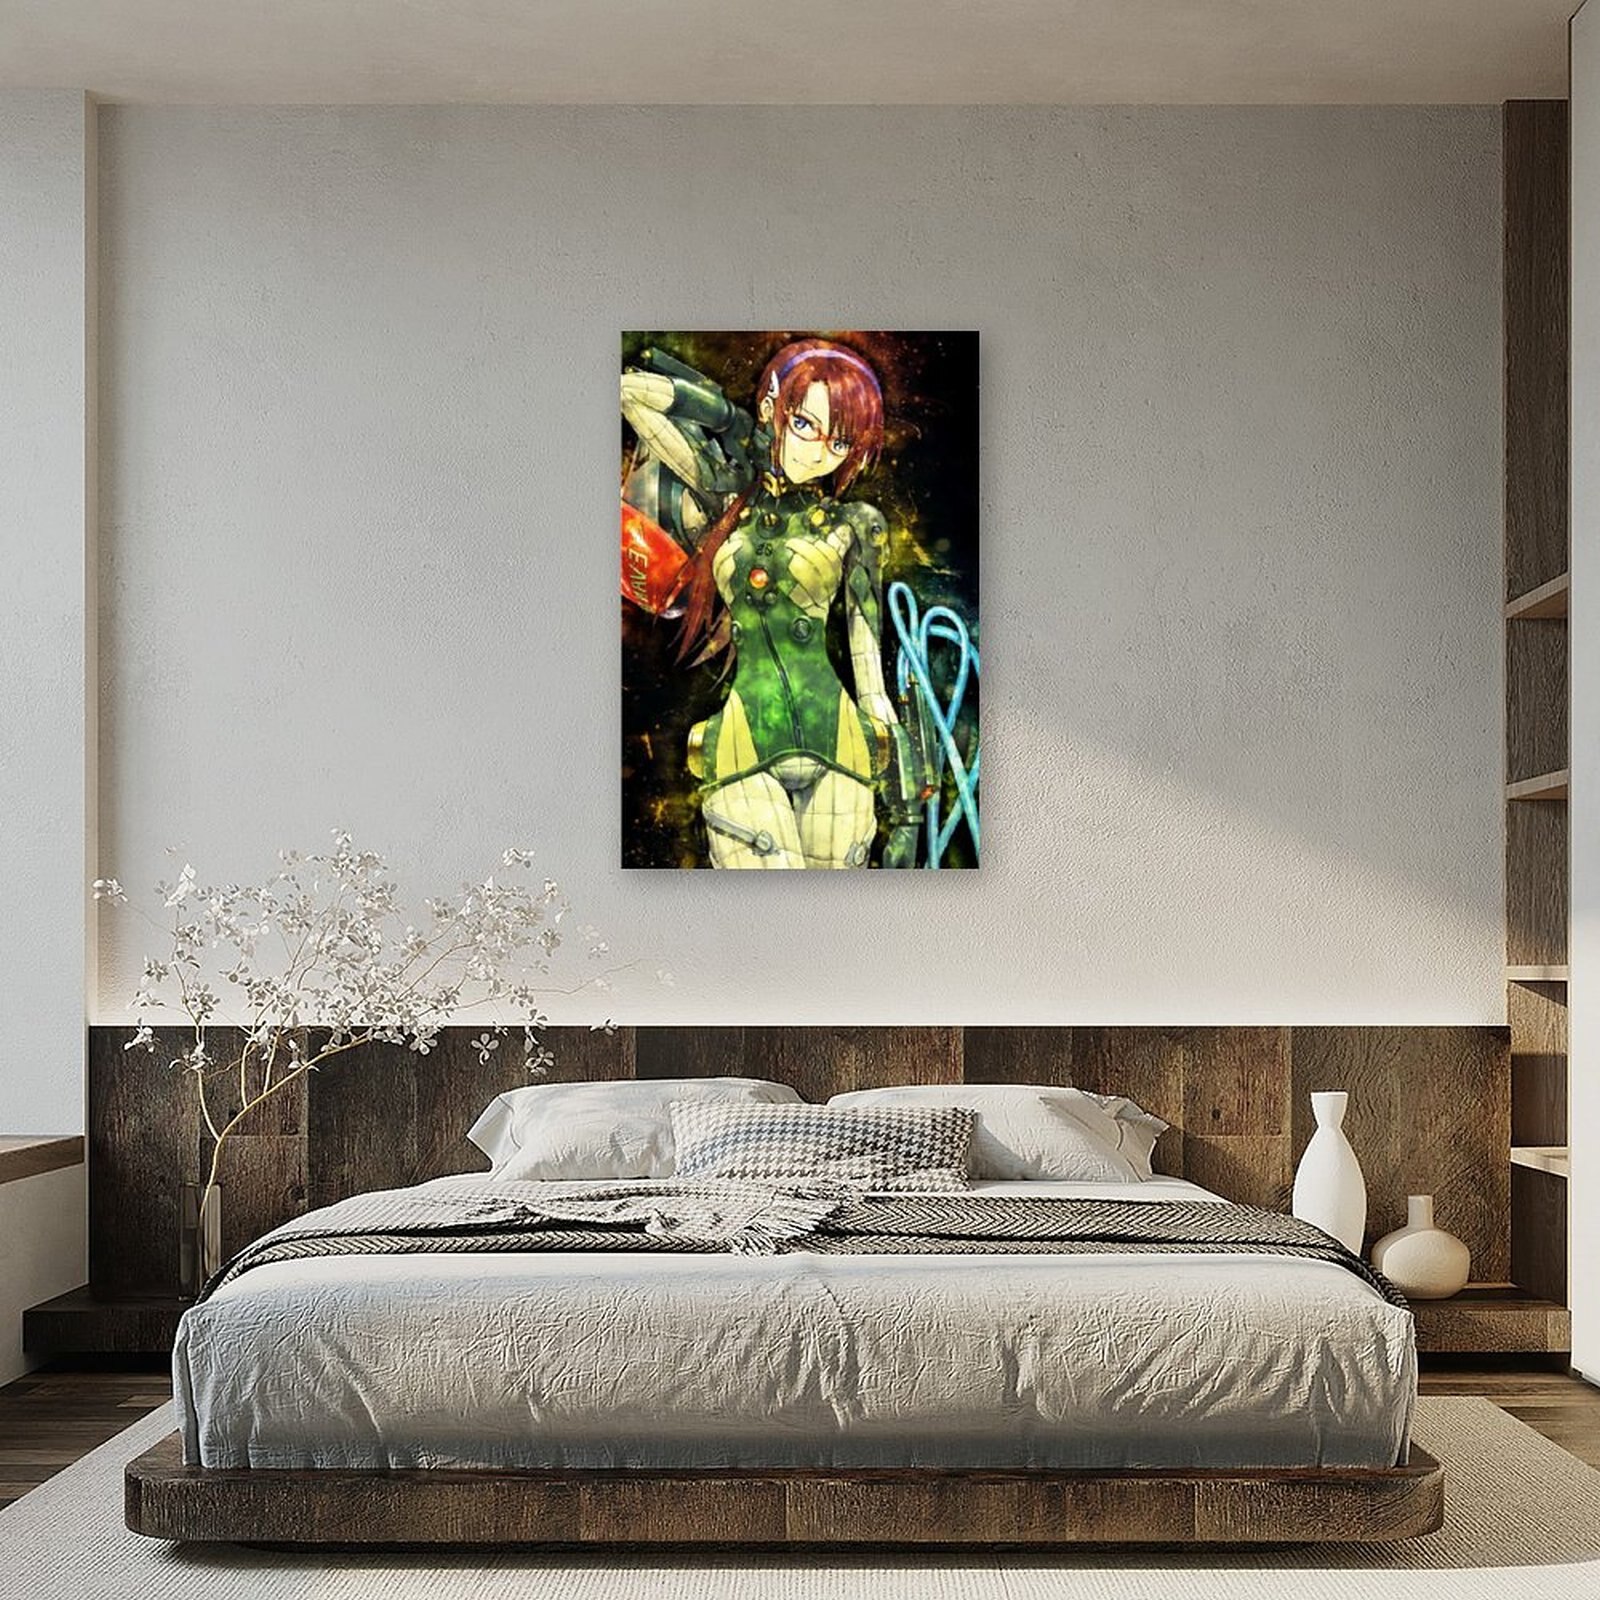 Anime Evangelion Girl MakinamiCanvas Painting Wall Art Posters and Prints Wall Pictures for Living Room Decoration 5 - Evangelion Shop